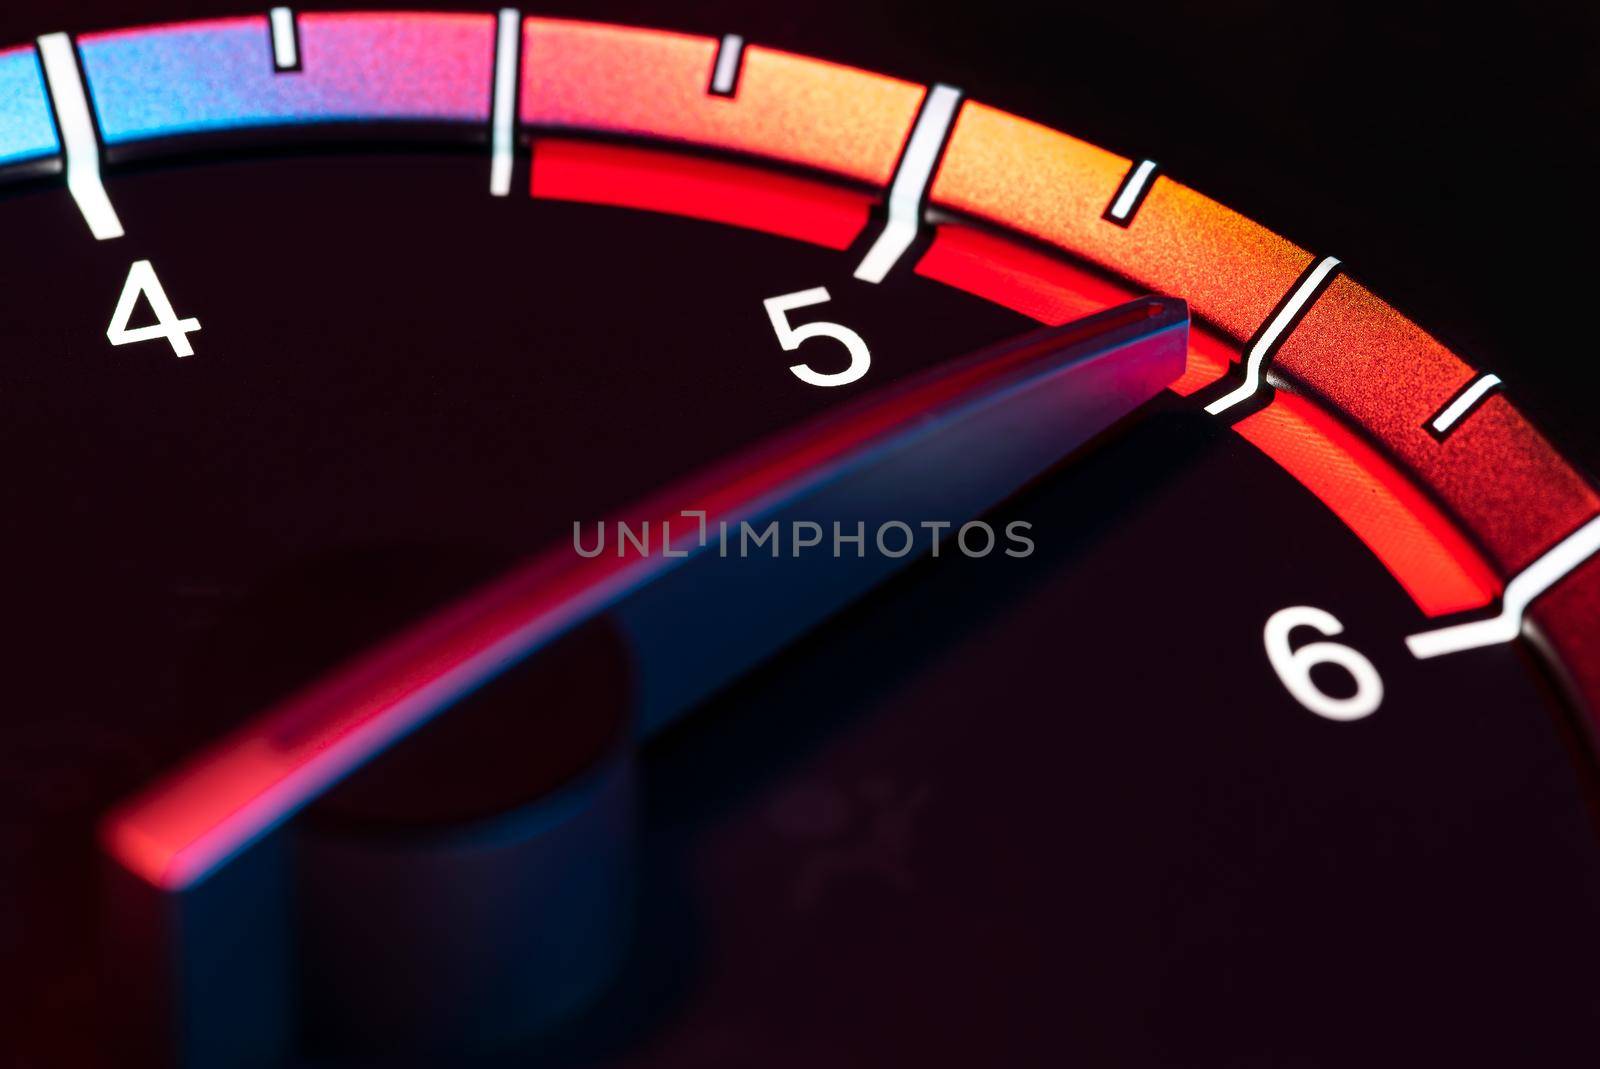 Rpm car odometer detail symbol of power and speed